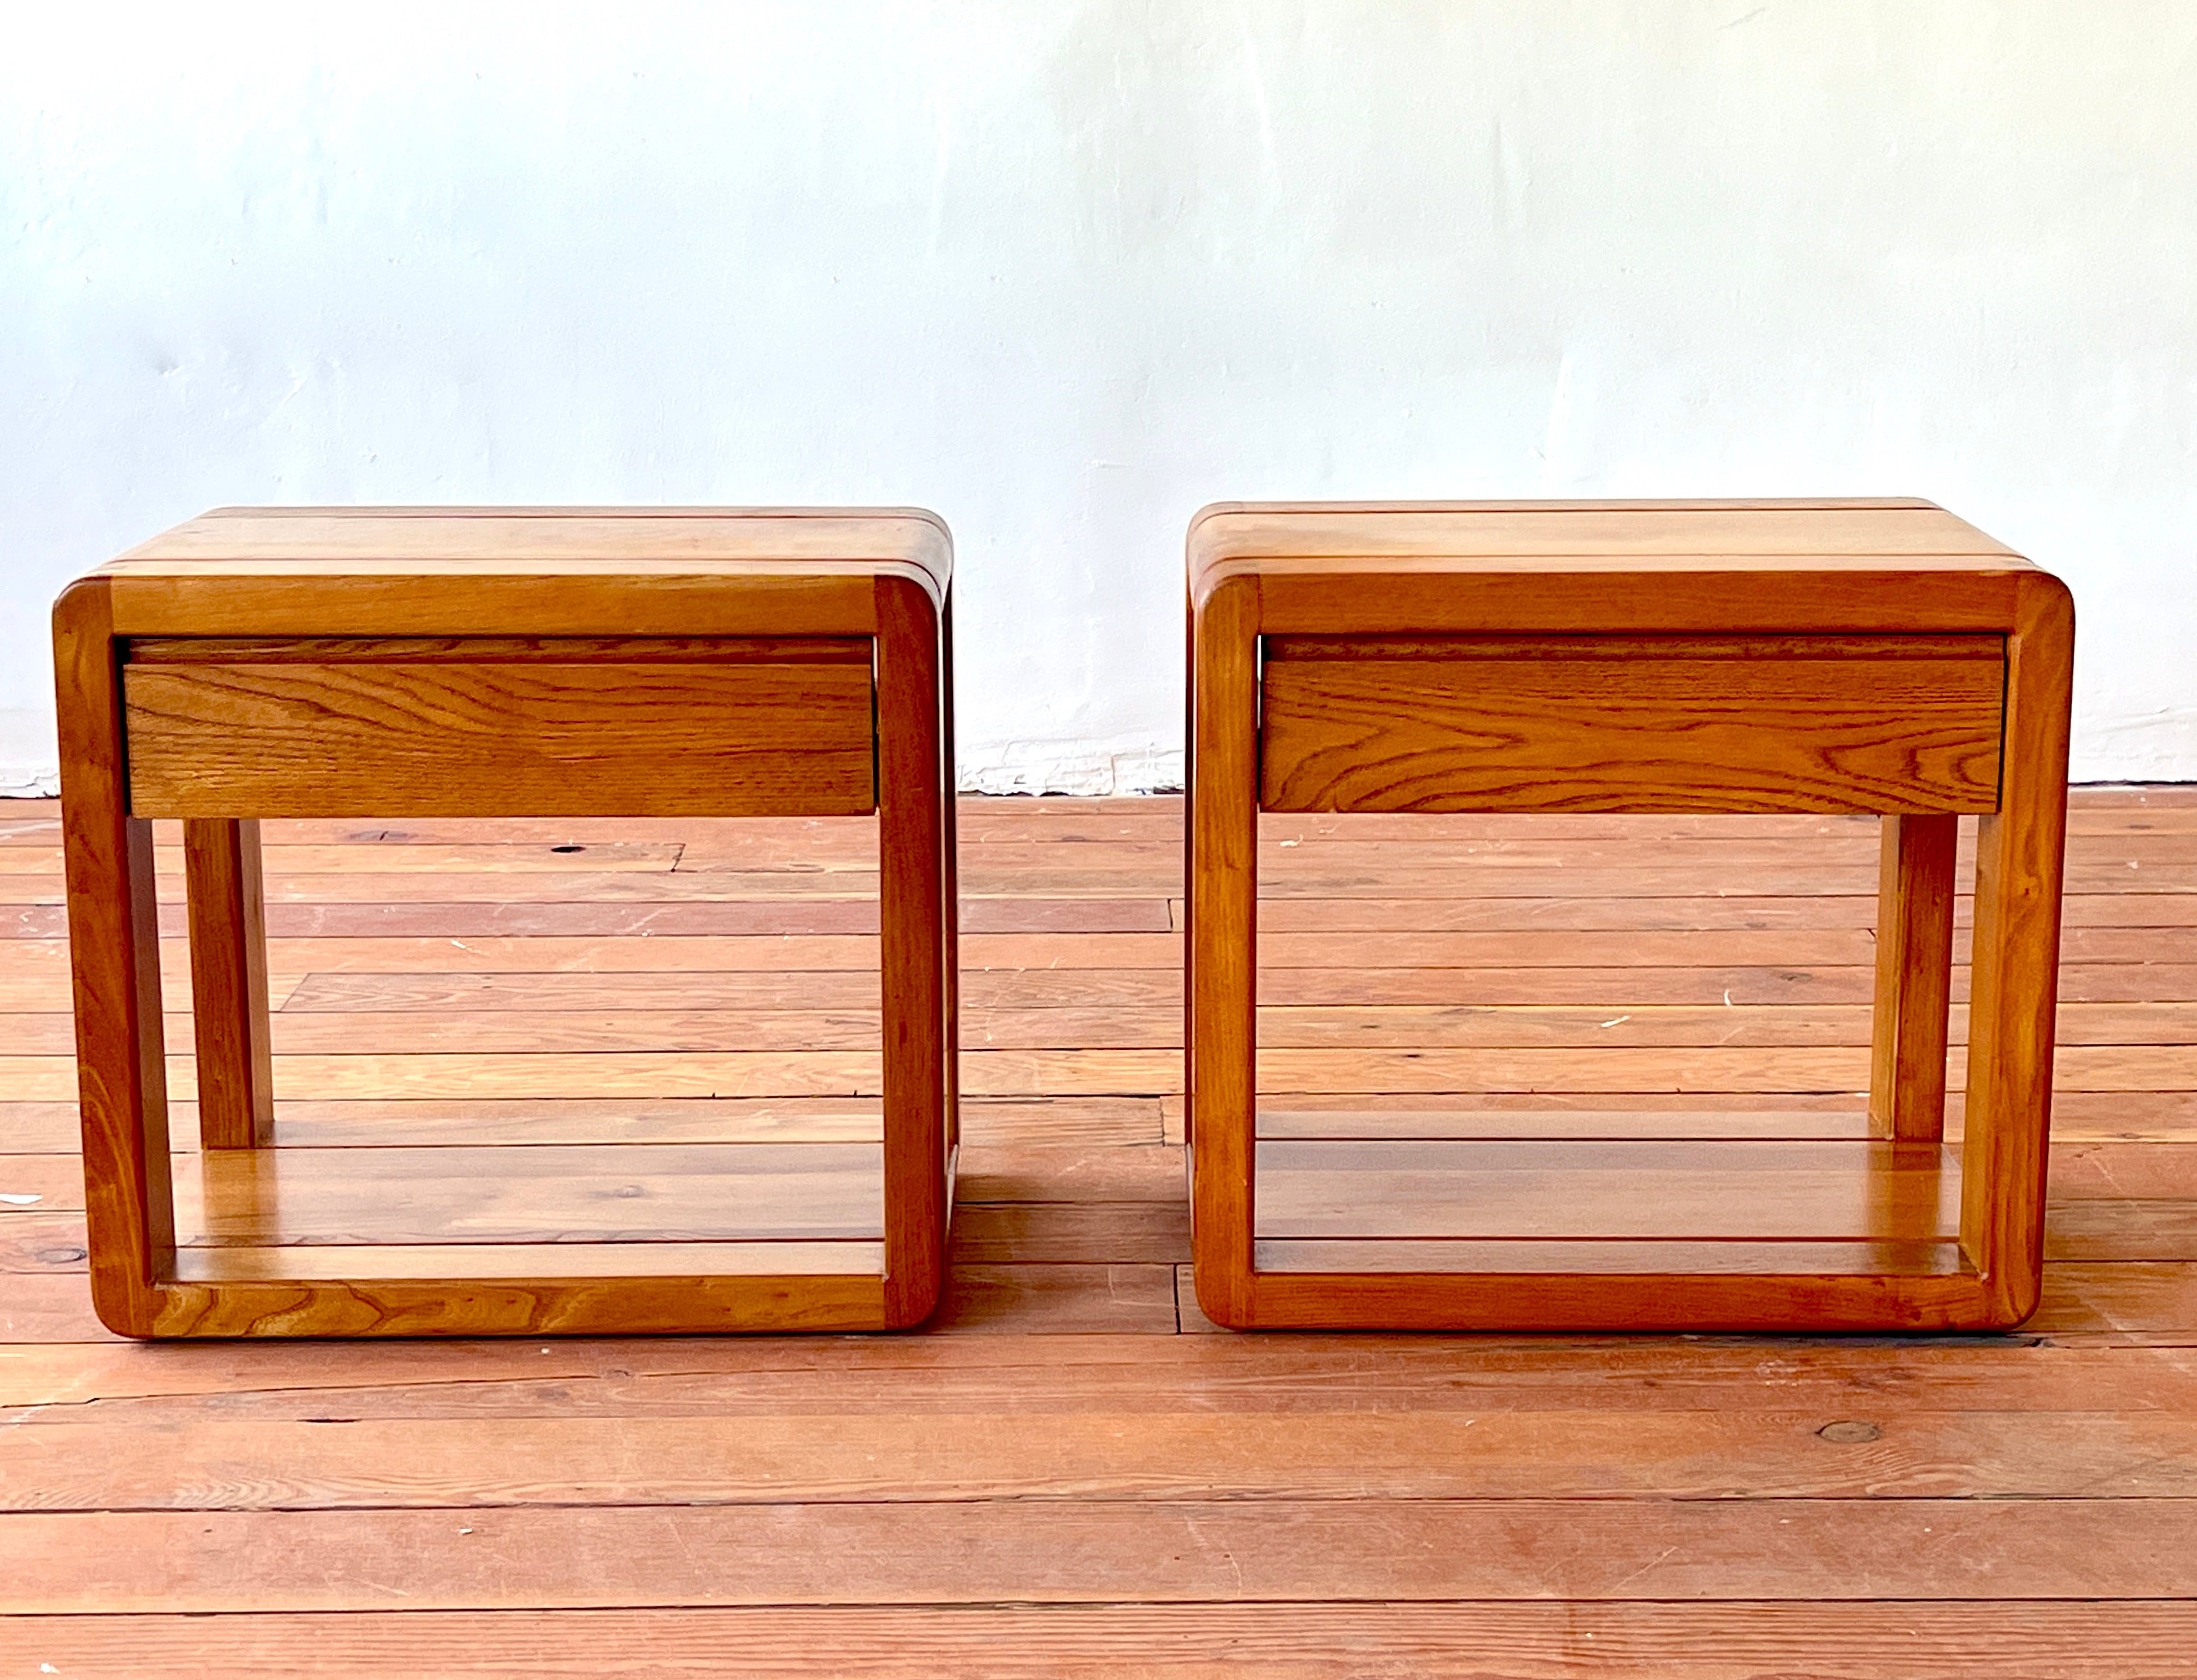 French elm nightstands / end tables by Maison Regain
Sleek simple design with curved ends and single drawer for storage.